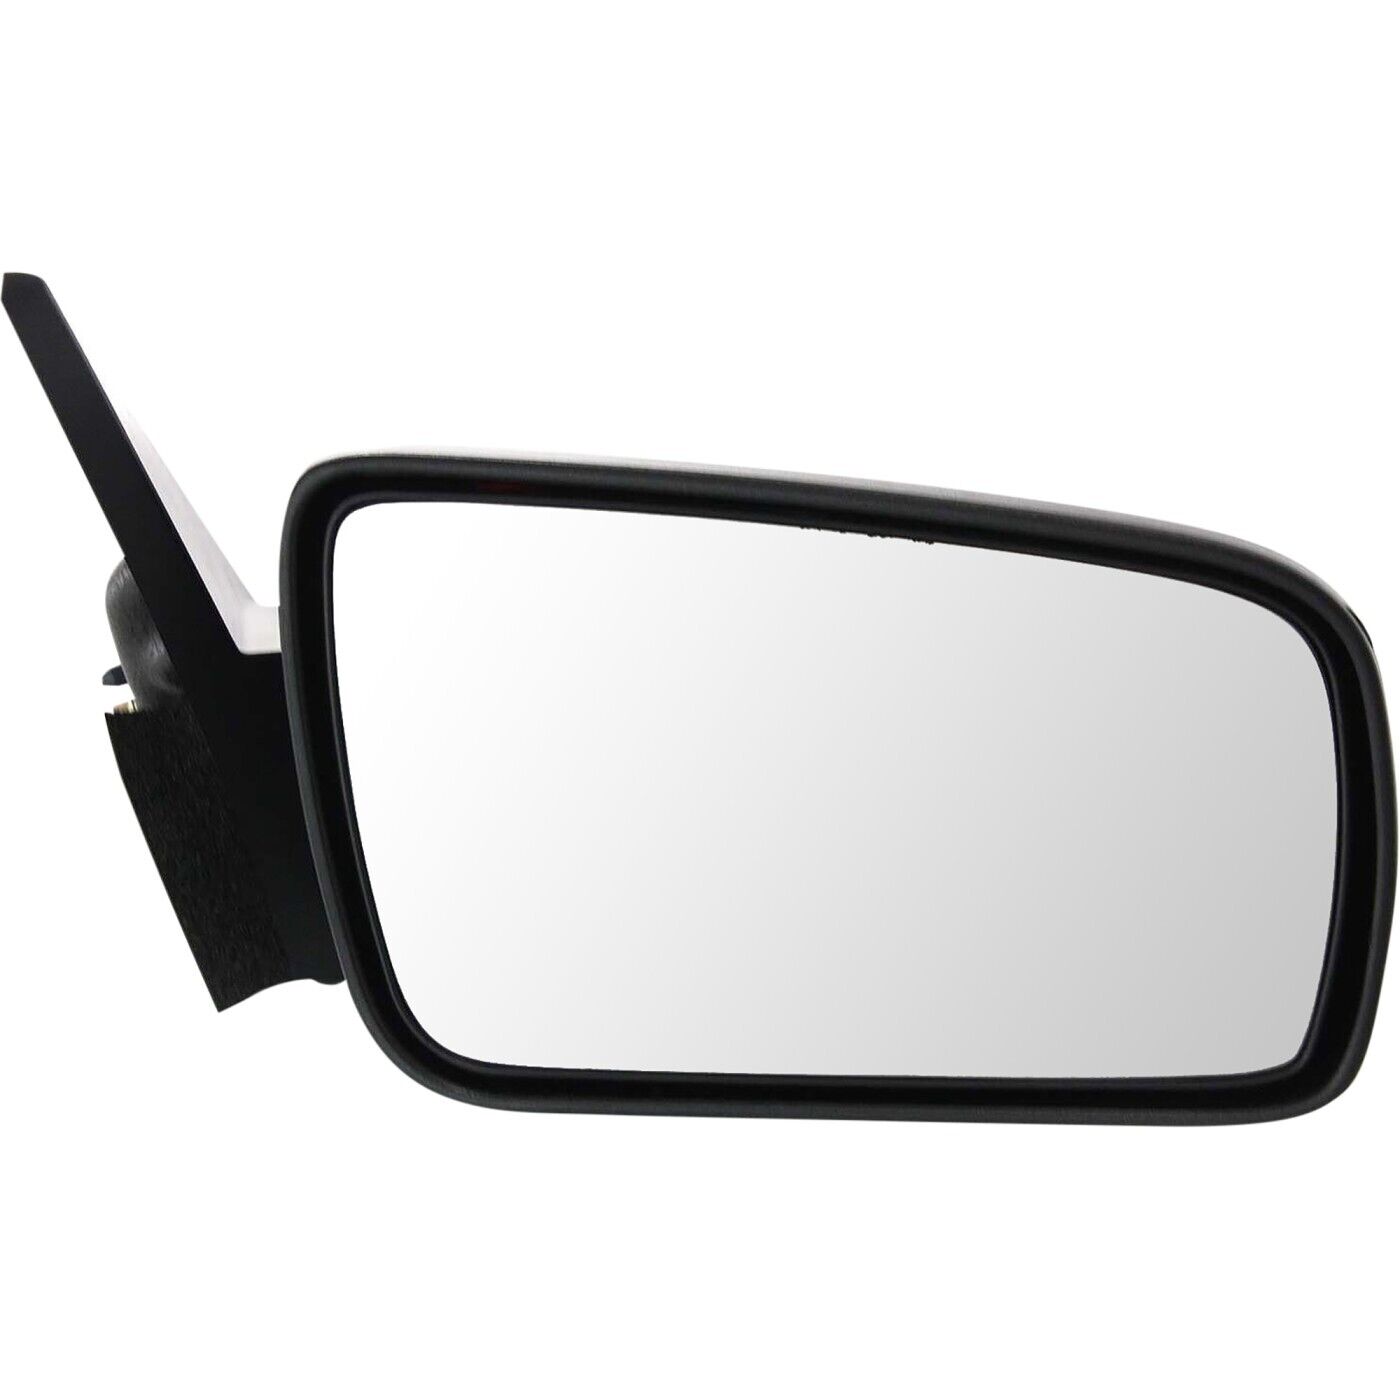 Mirror Passenger Side For 2005-2009 Ford Mustang Textured Black Power Glass